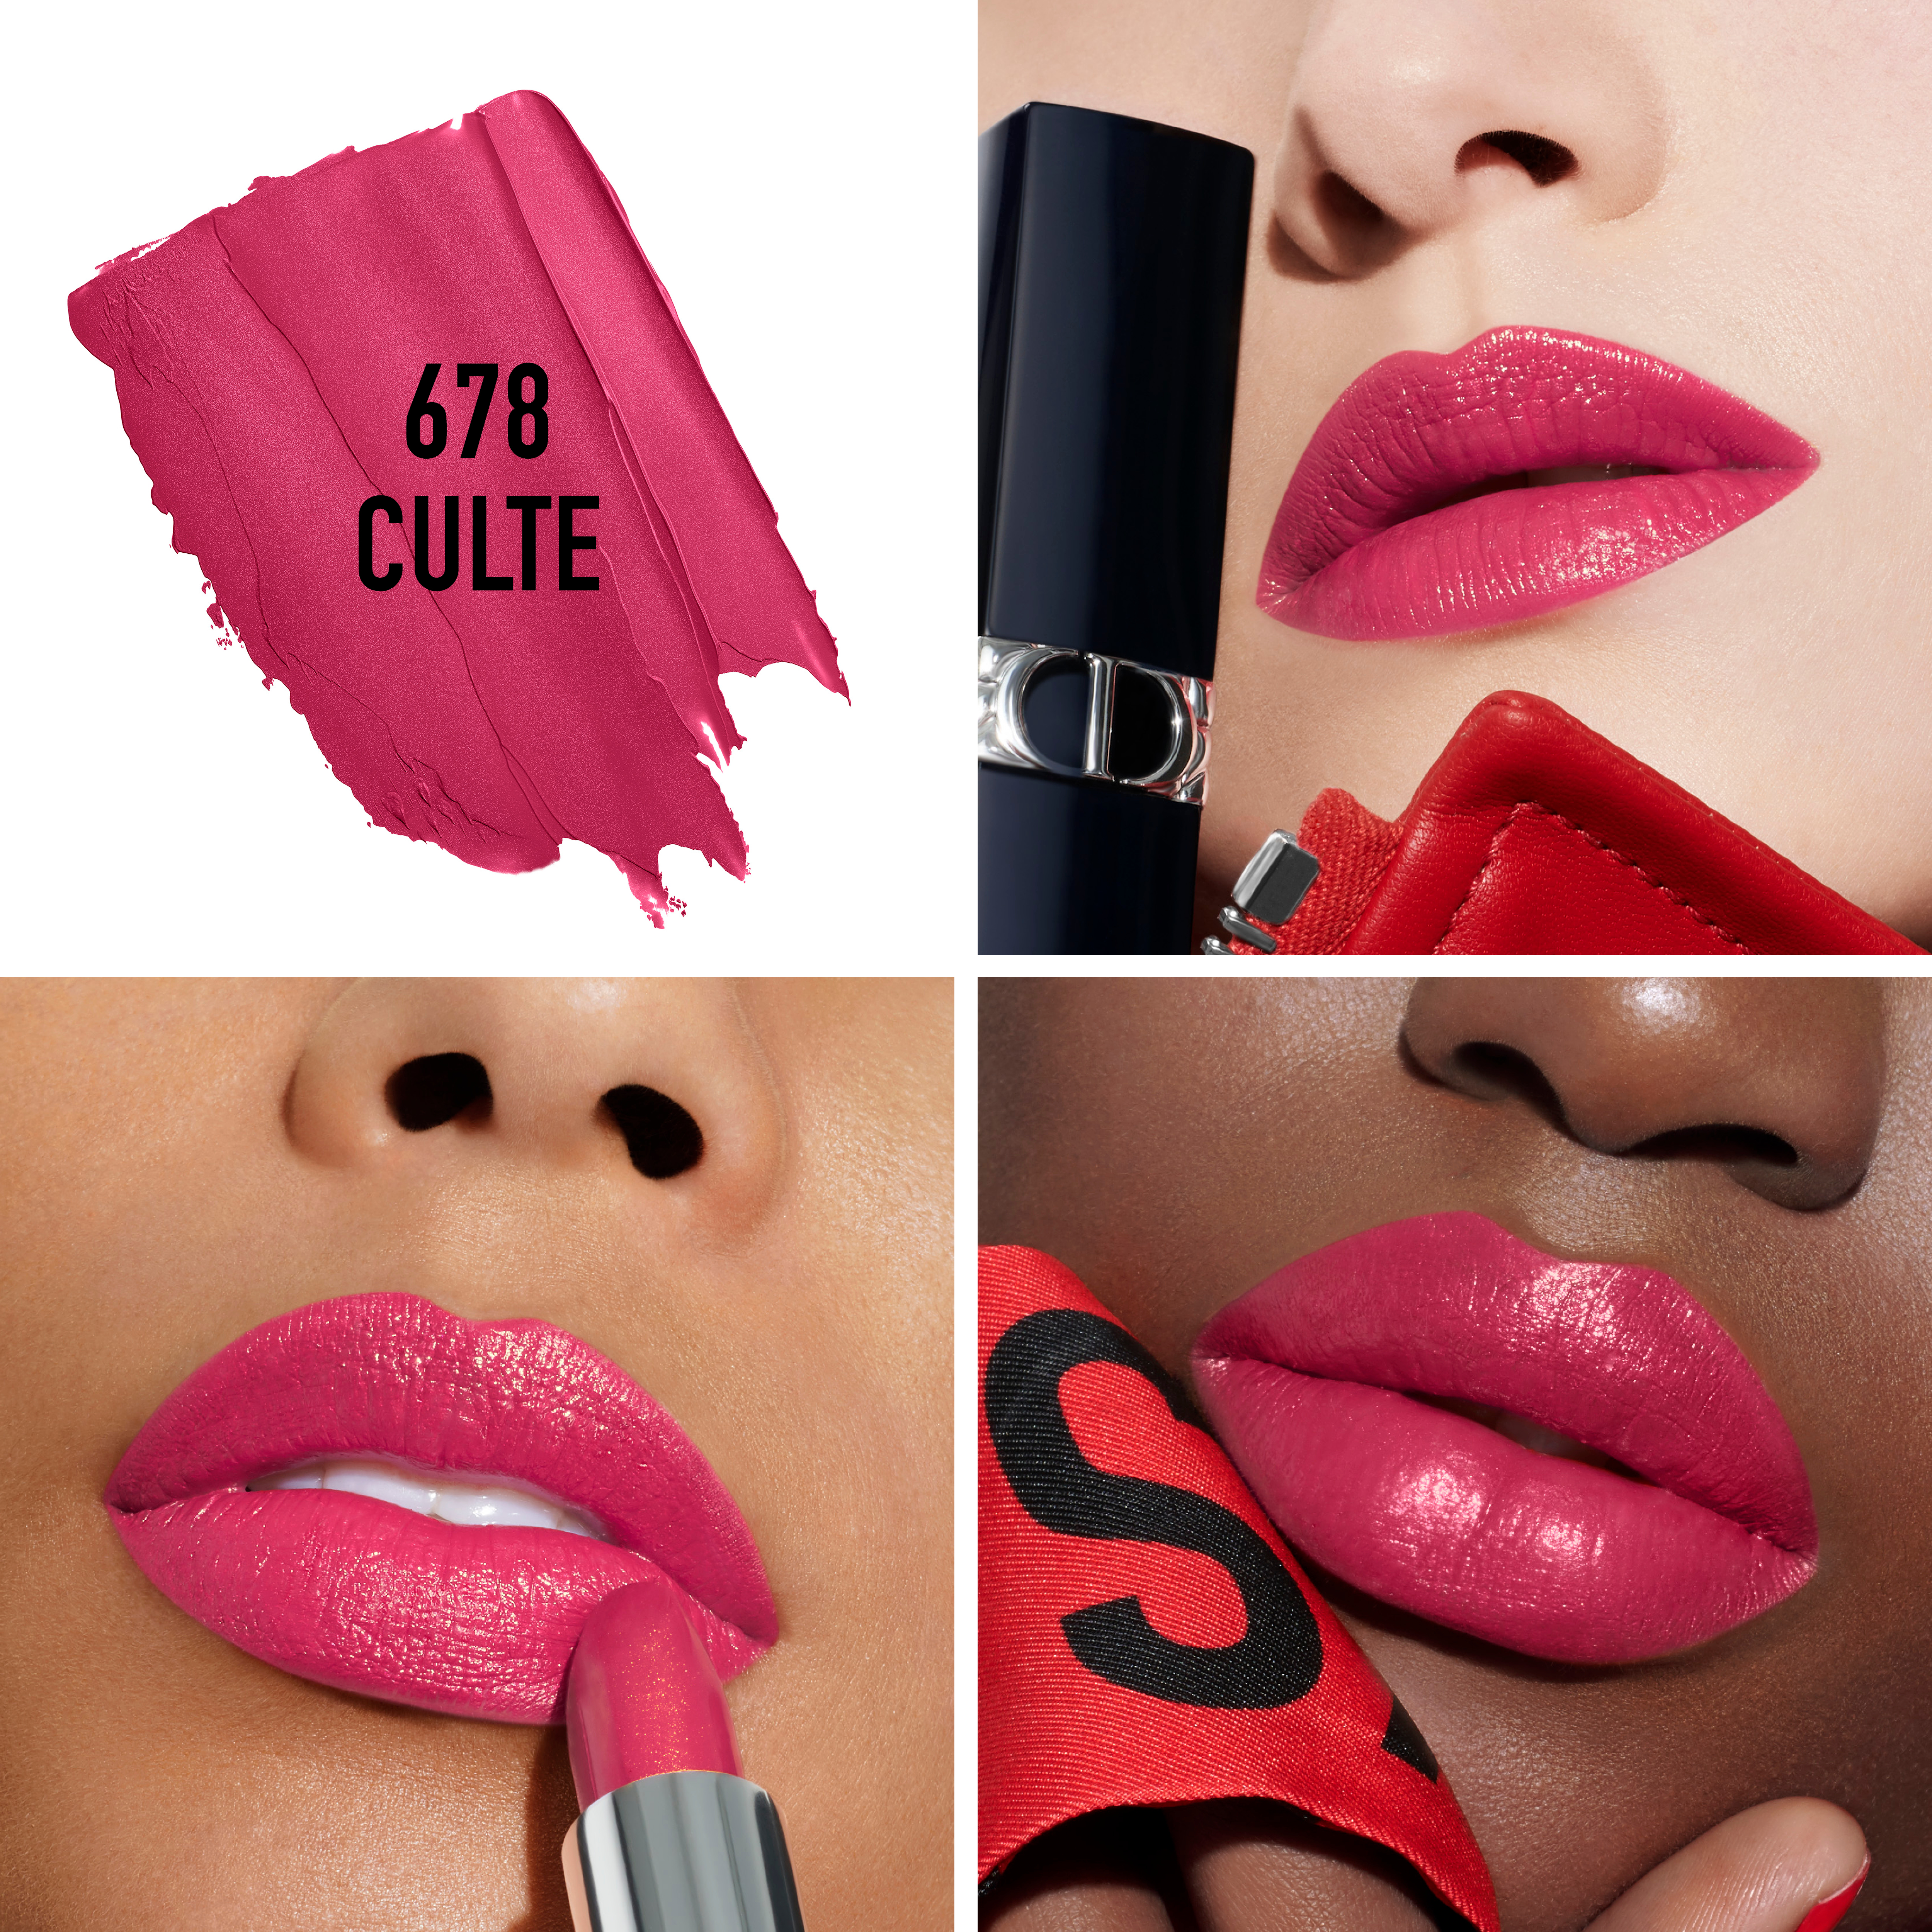  Rouge Refillable Extra Satin Lipstick, 678 Culte